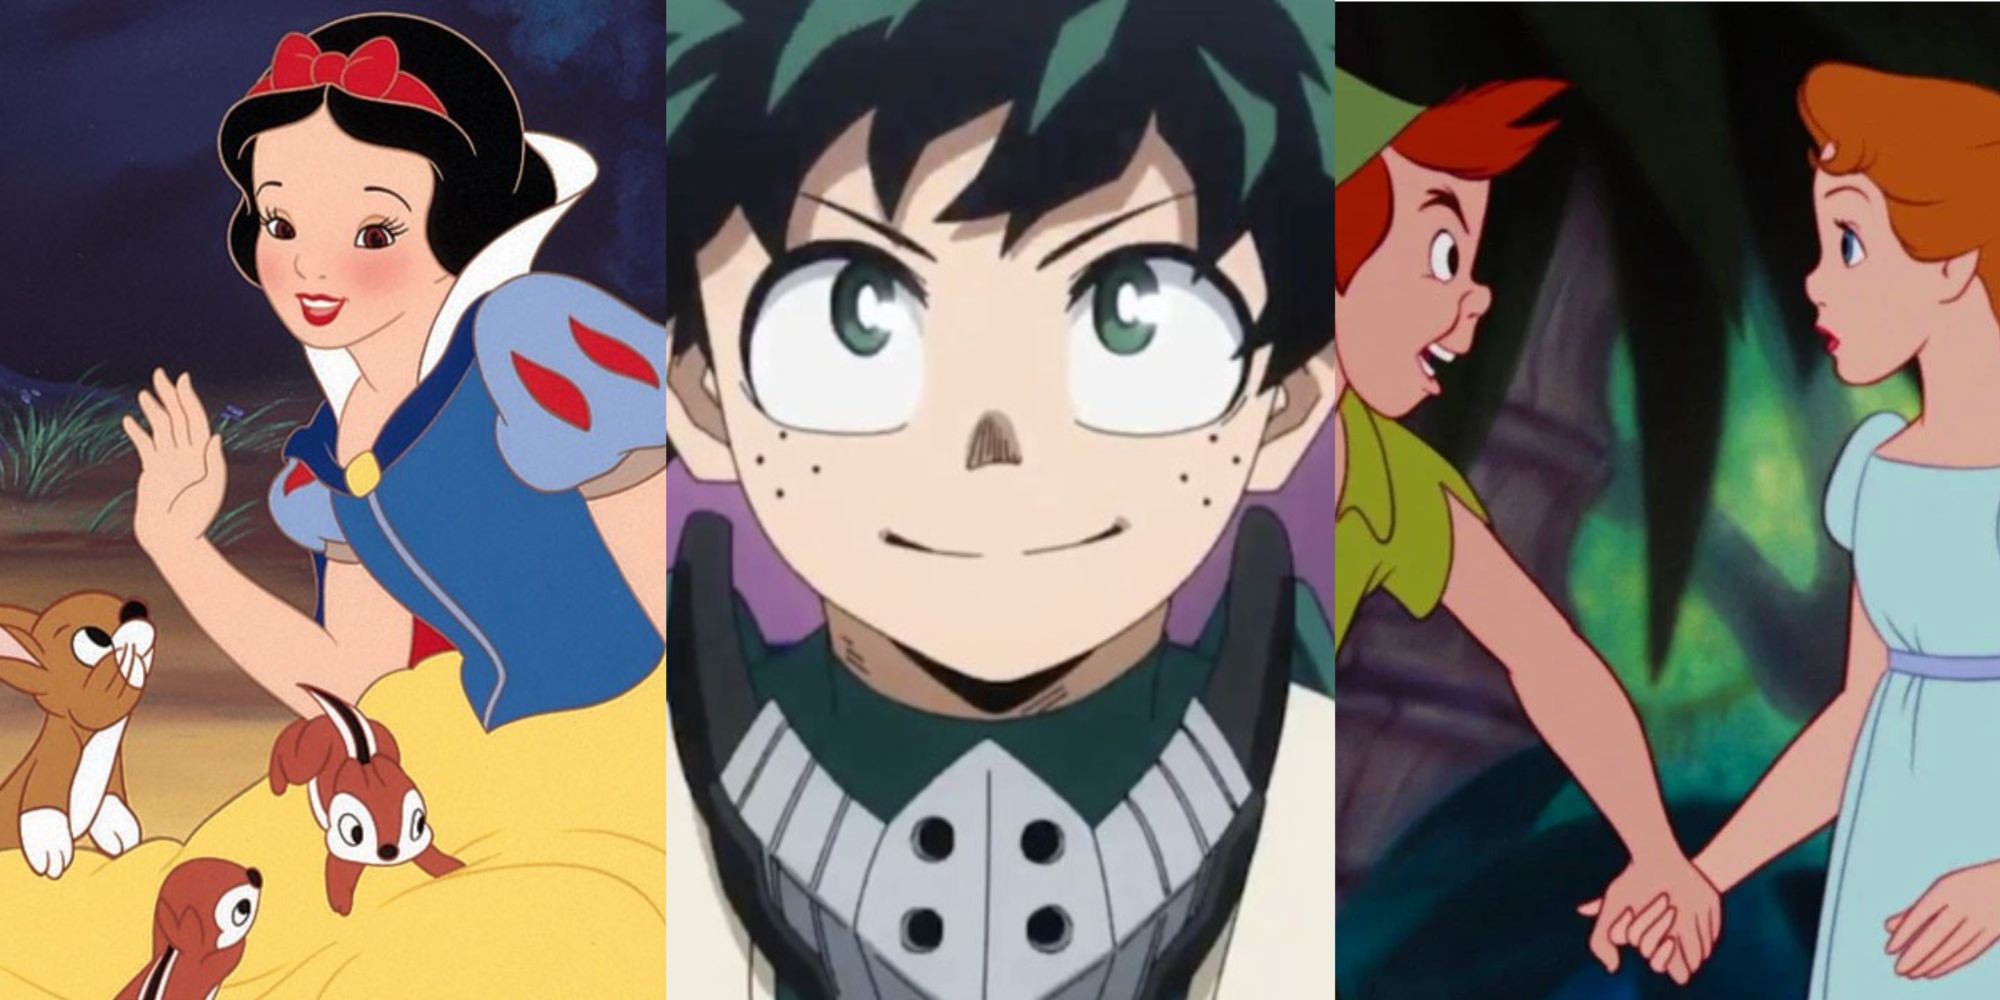 Split Image Snow White, My Hero Academia Character, Peter Pan and Wendy